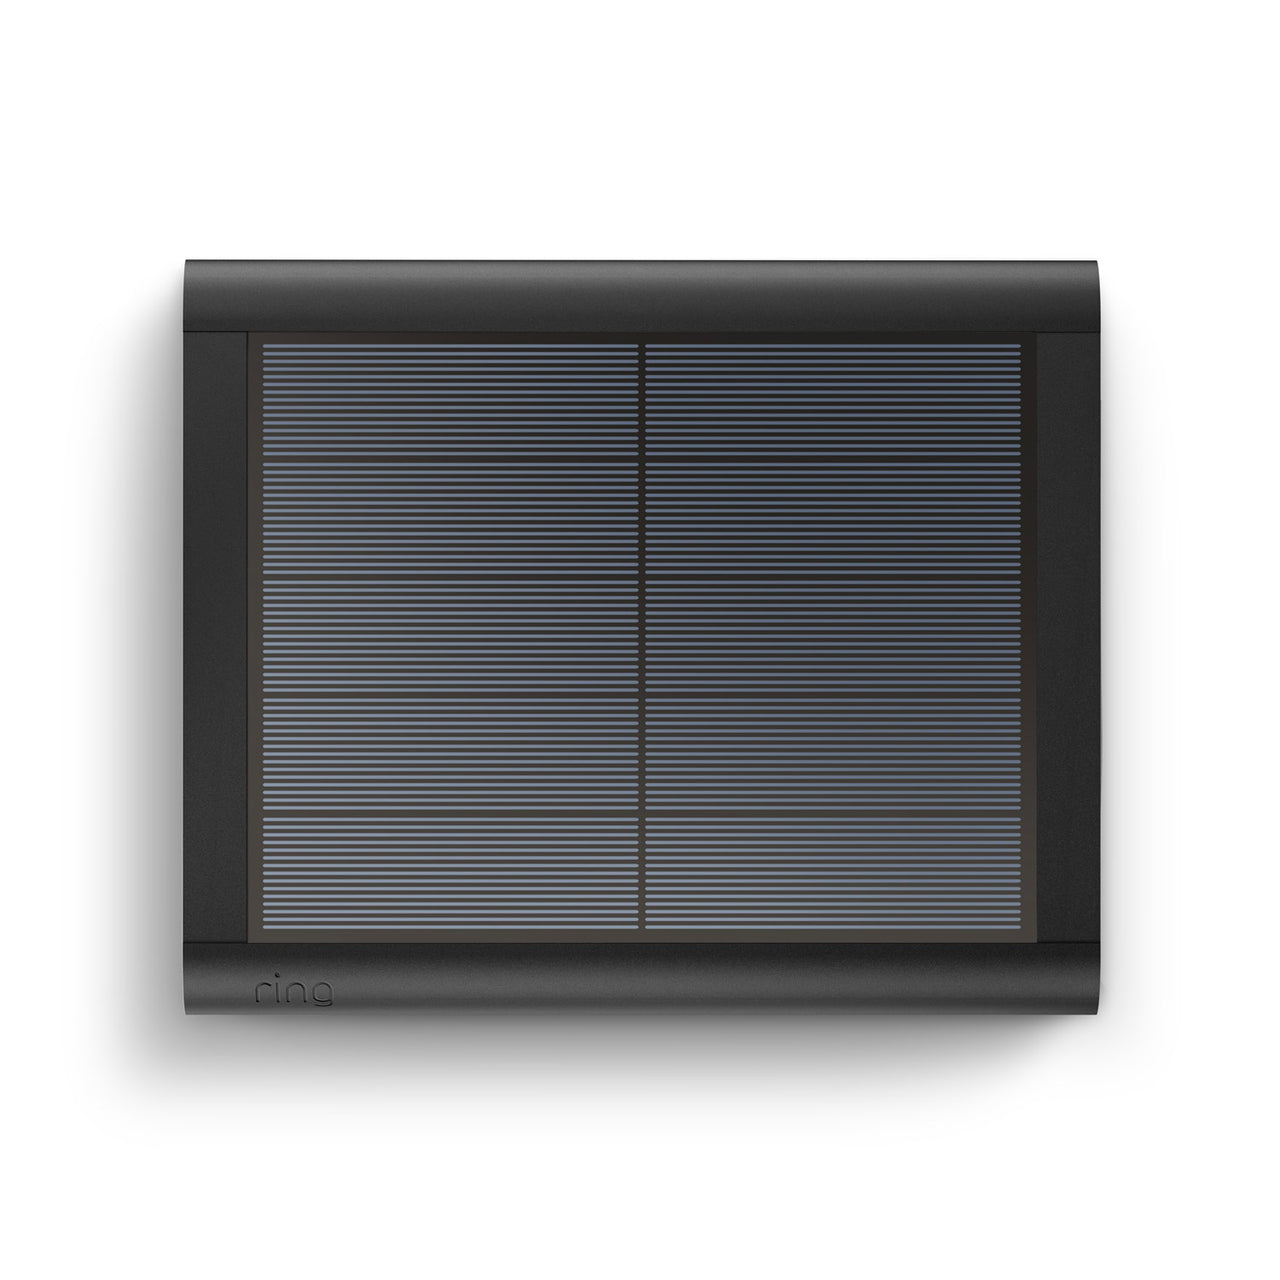 products/ring_solarpanelgen2_blk_front_wall_1500x1500_18bcf08c-bb9a-45ac-be05-4b6c5af32eef.jpg